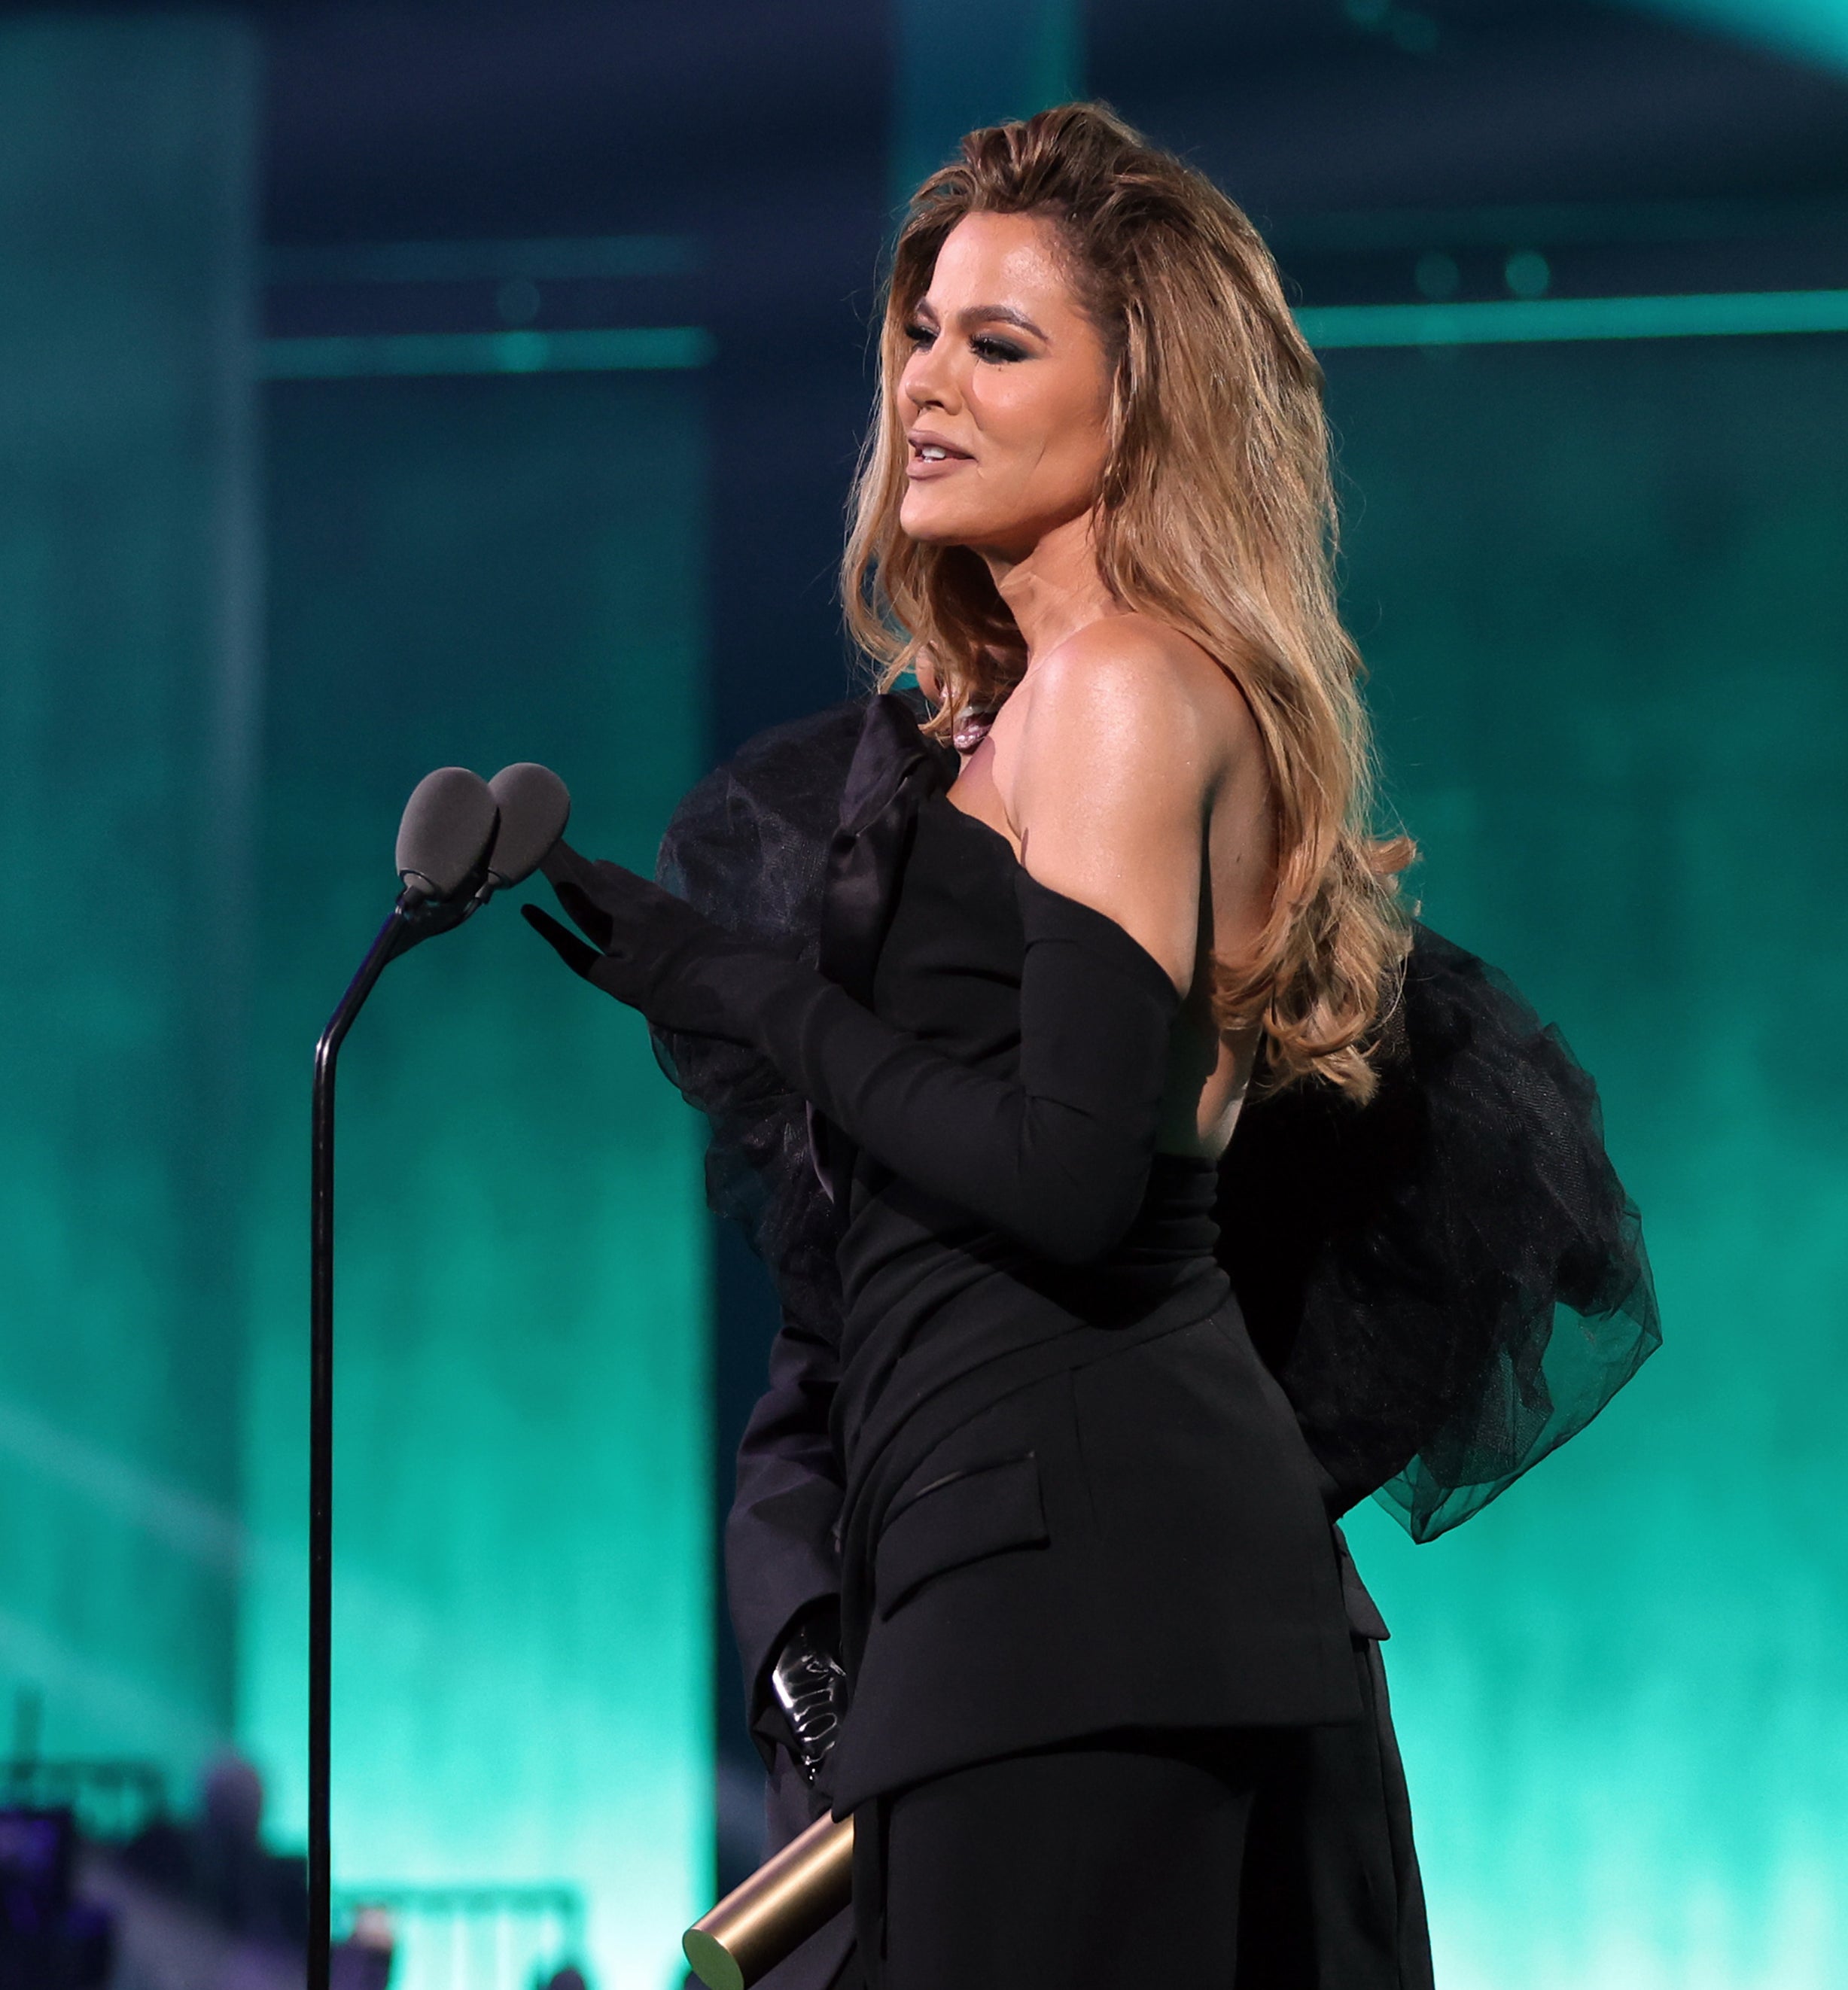 Khloé Kardashian stands on stage holding a microphone, wearing an elegant one-sleeve gown with volumized shoulder detail